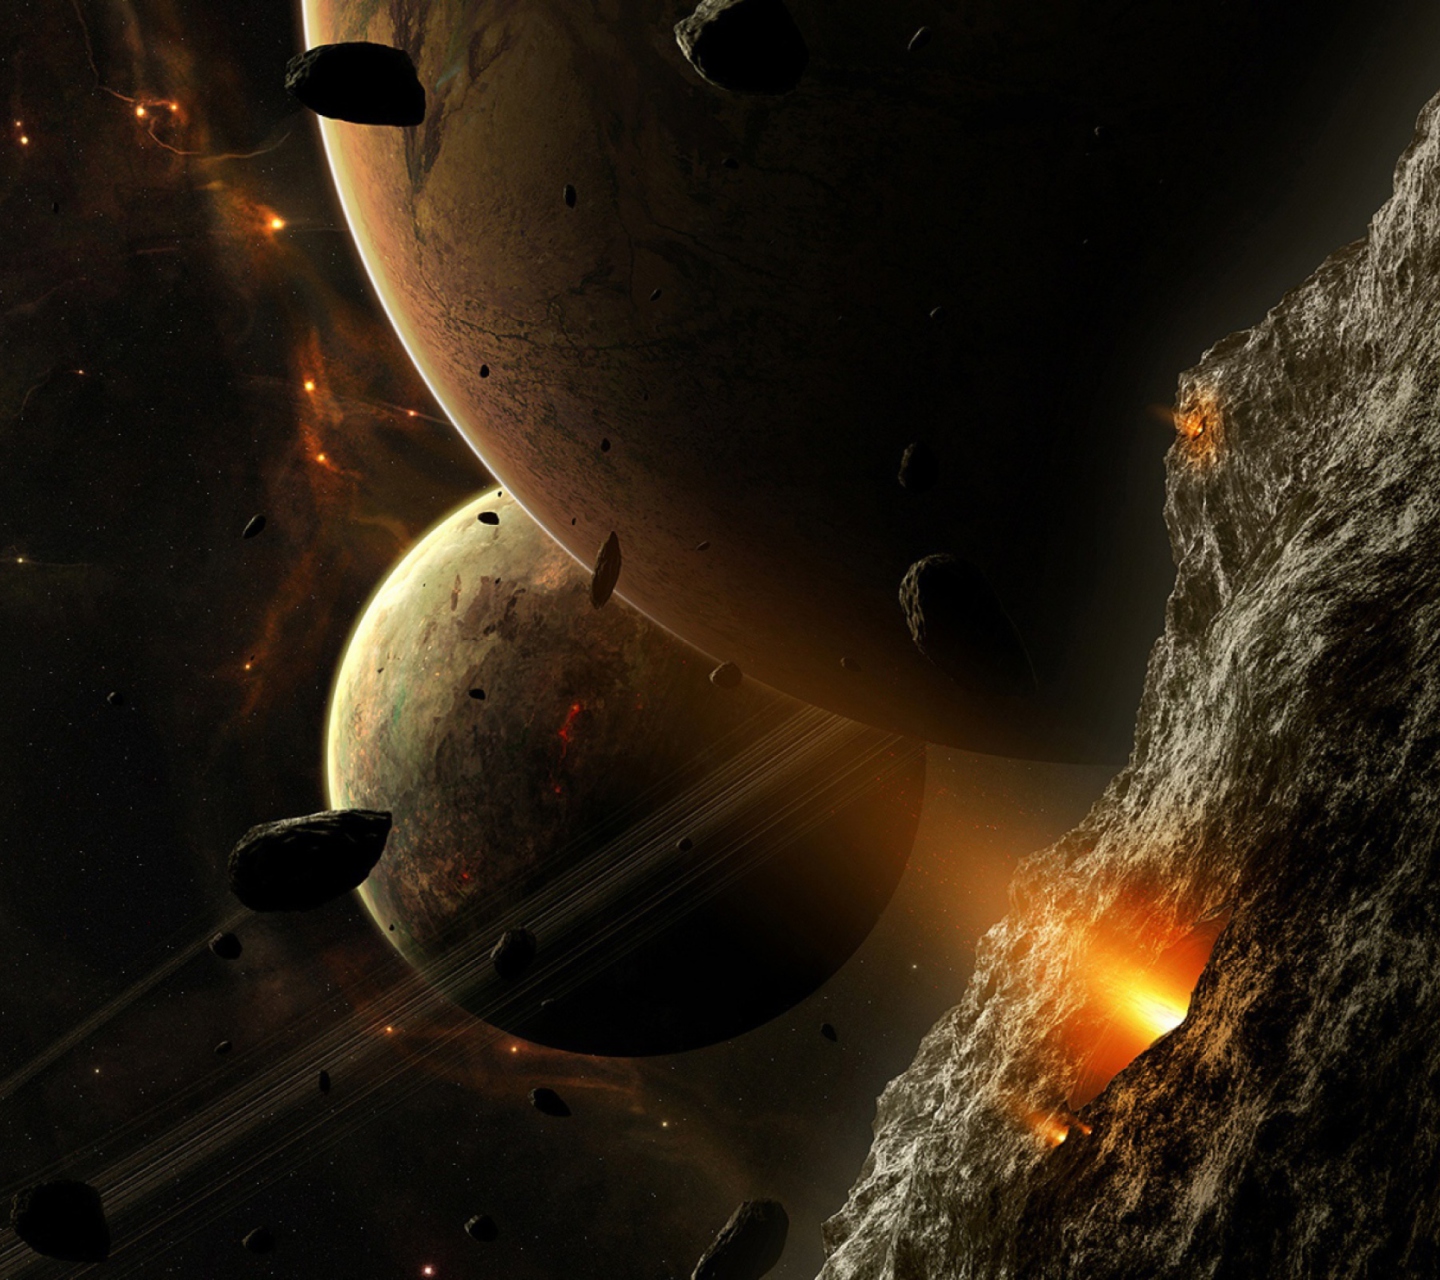 Asteroids And Planets wallpaper 1440x1280